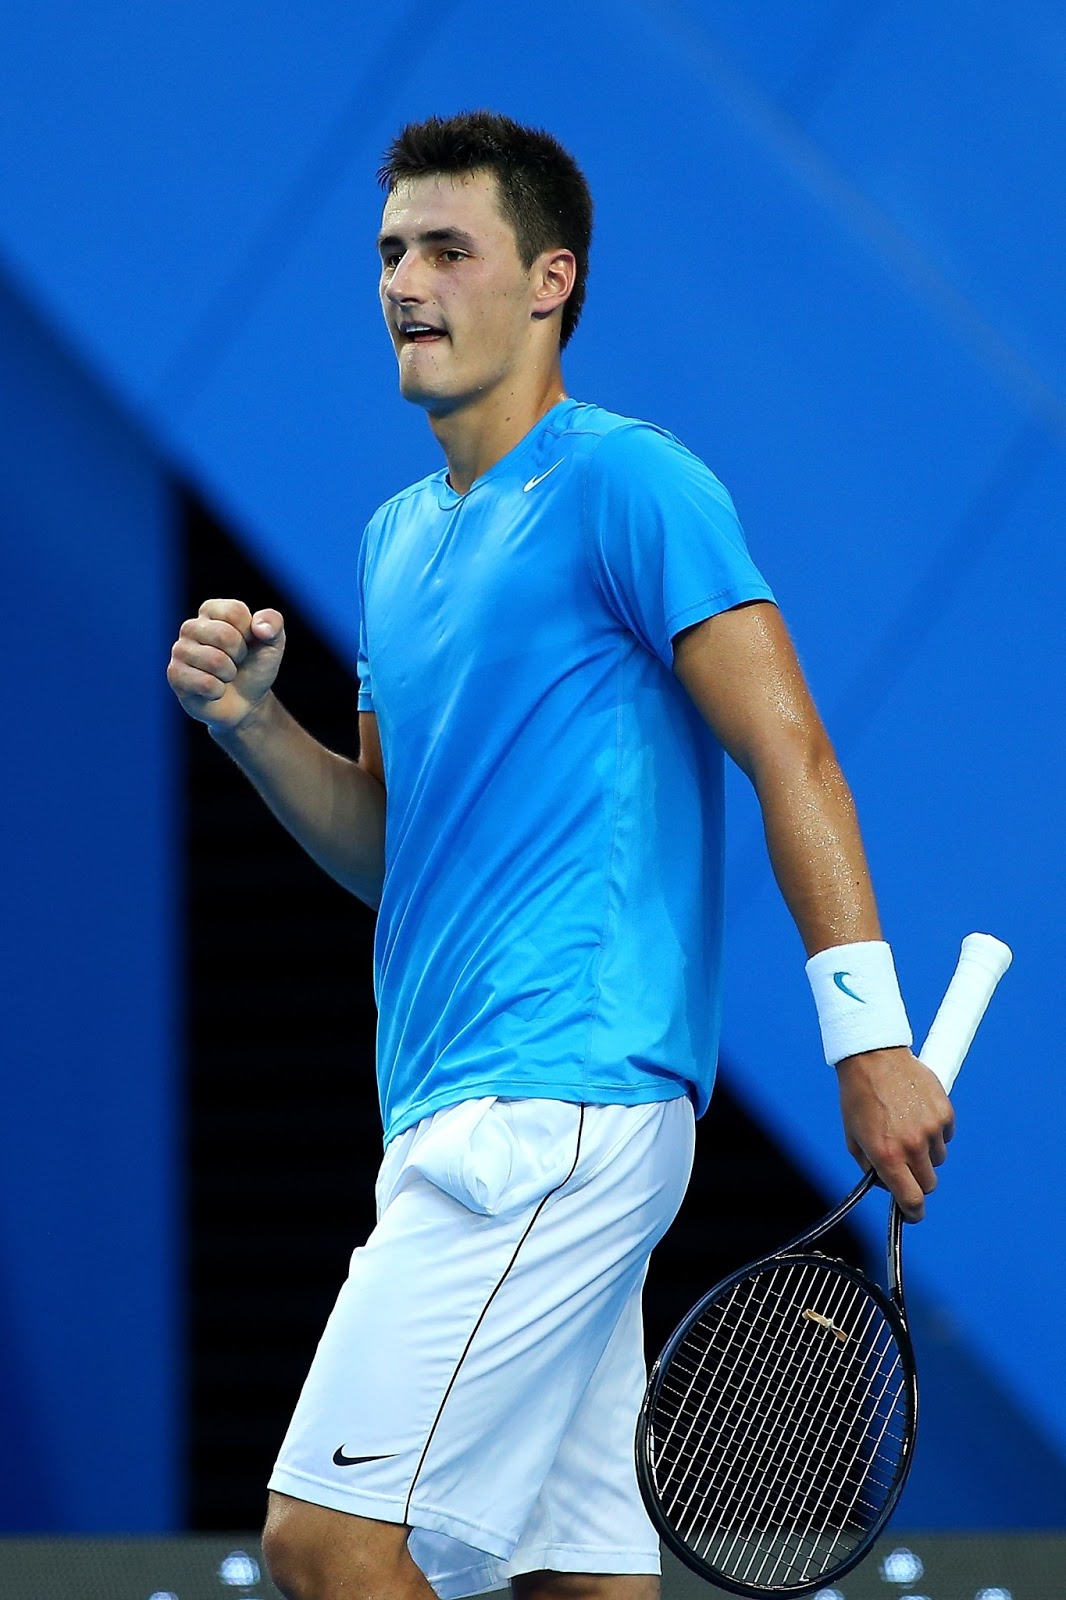 All About Sports: Bernard Tomic Profile, Biography, Pictures And Wallpapers1066 x 1600